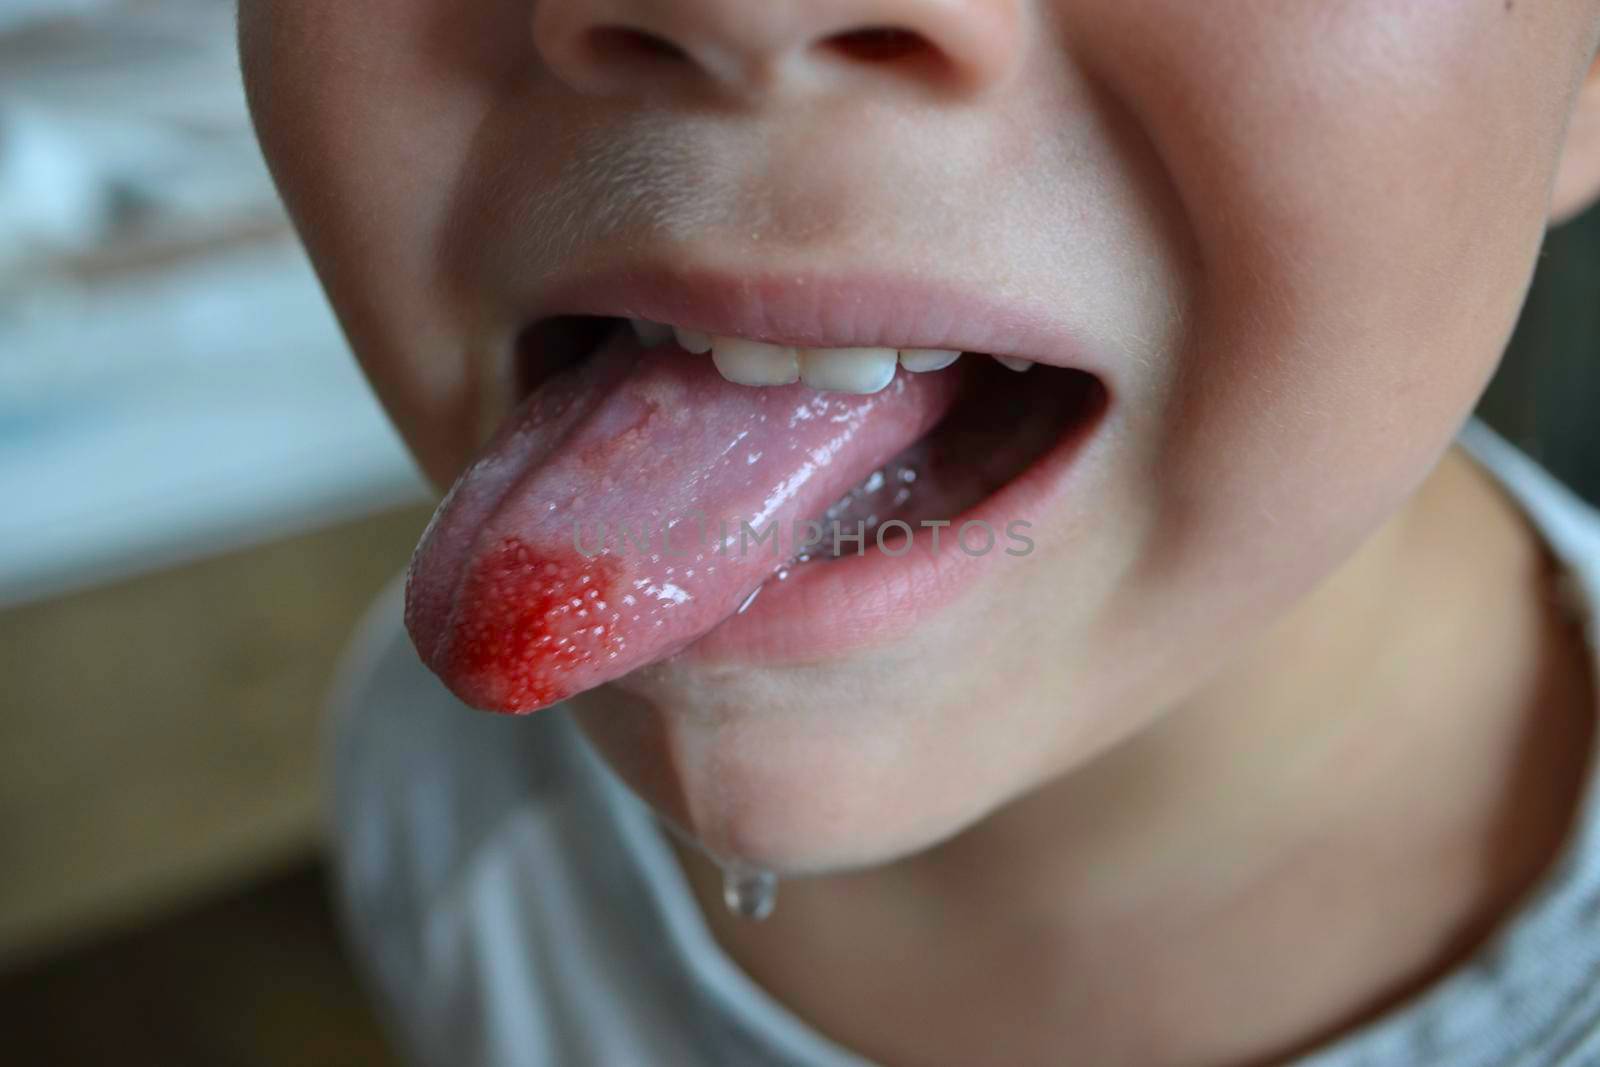 Close-up of lips, tongue, protrusion of blood. Child's bitten tongue. by milastokerpro